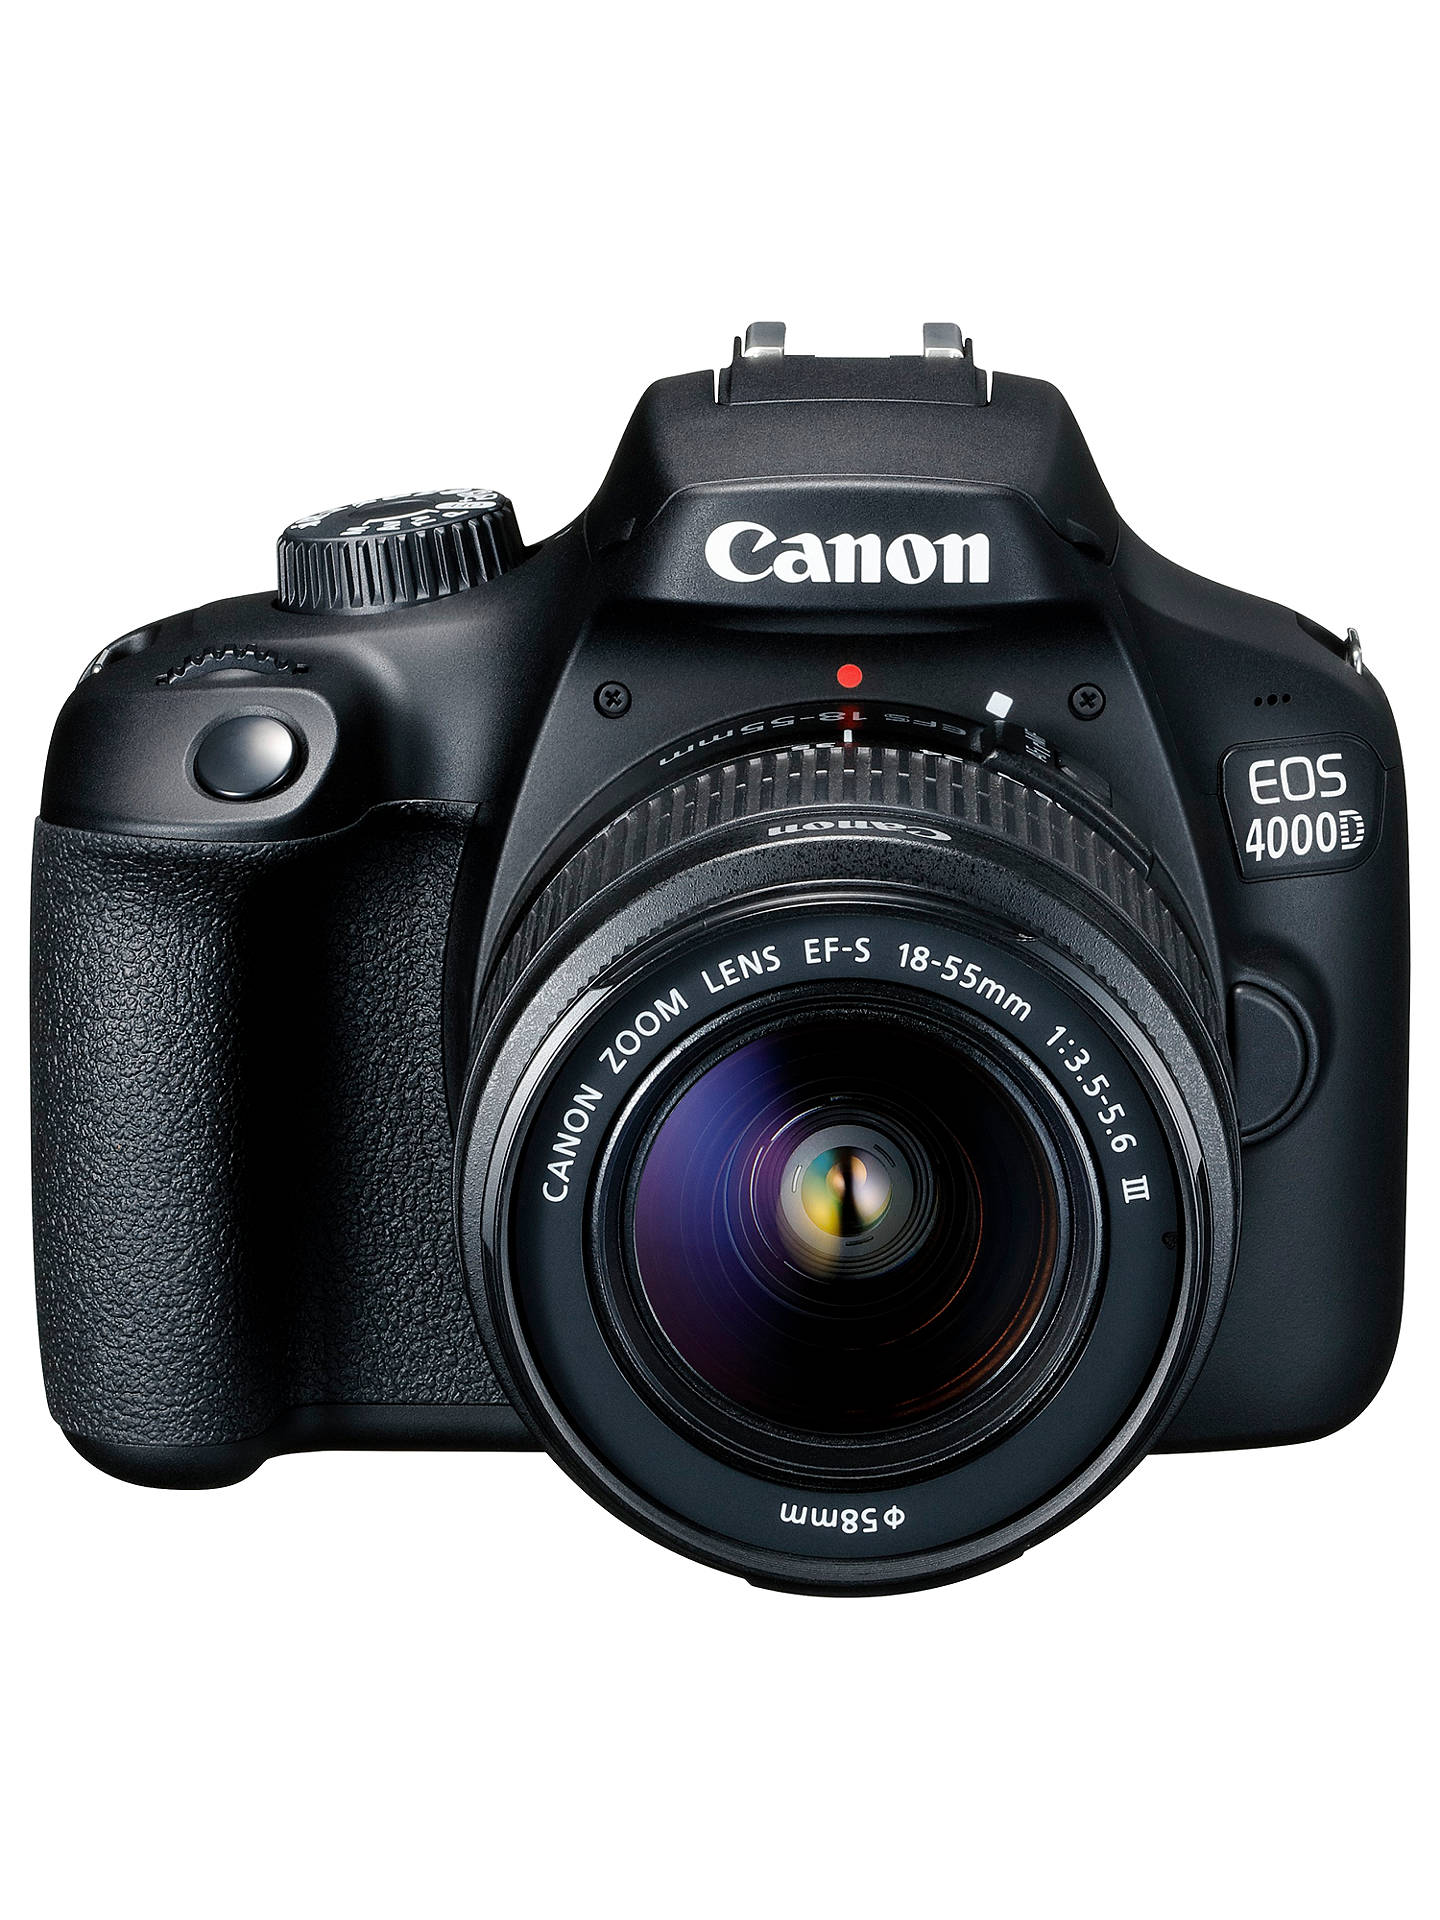 Canon EOS 4000D Digital SLR Camera with 18-55mm f/3.5-5.6 ...